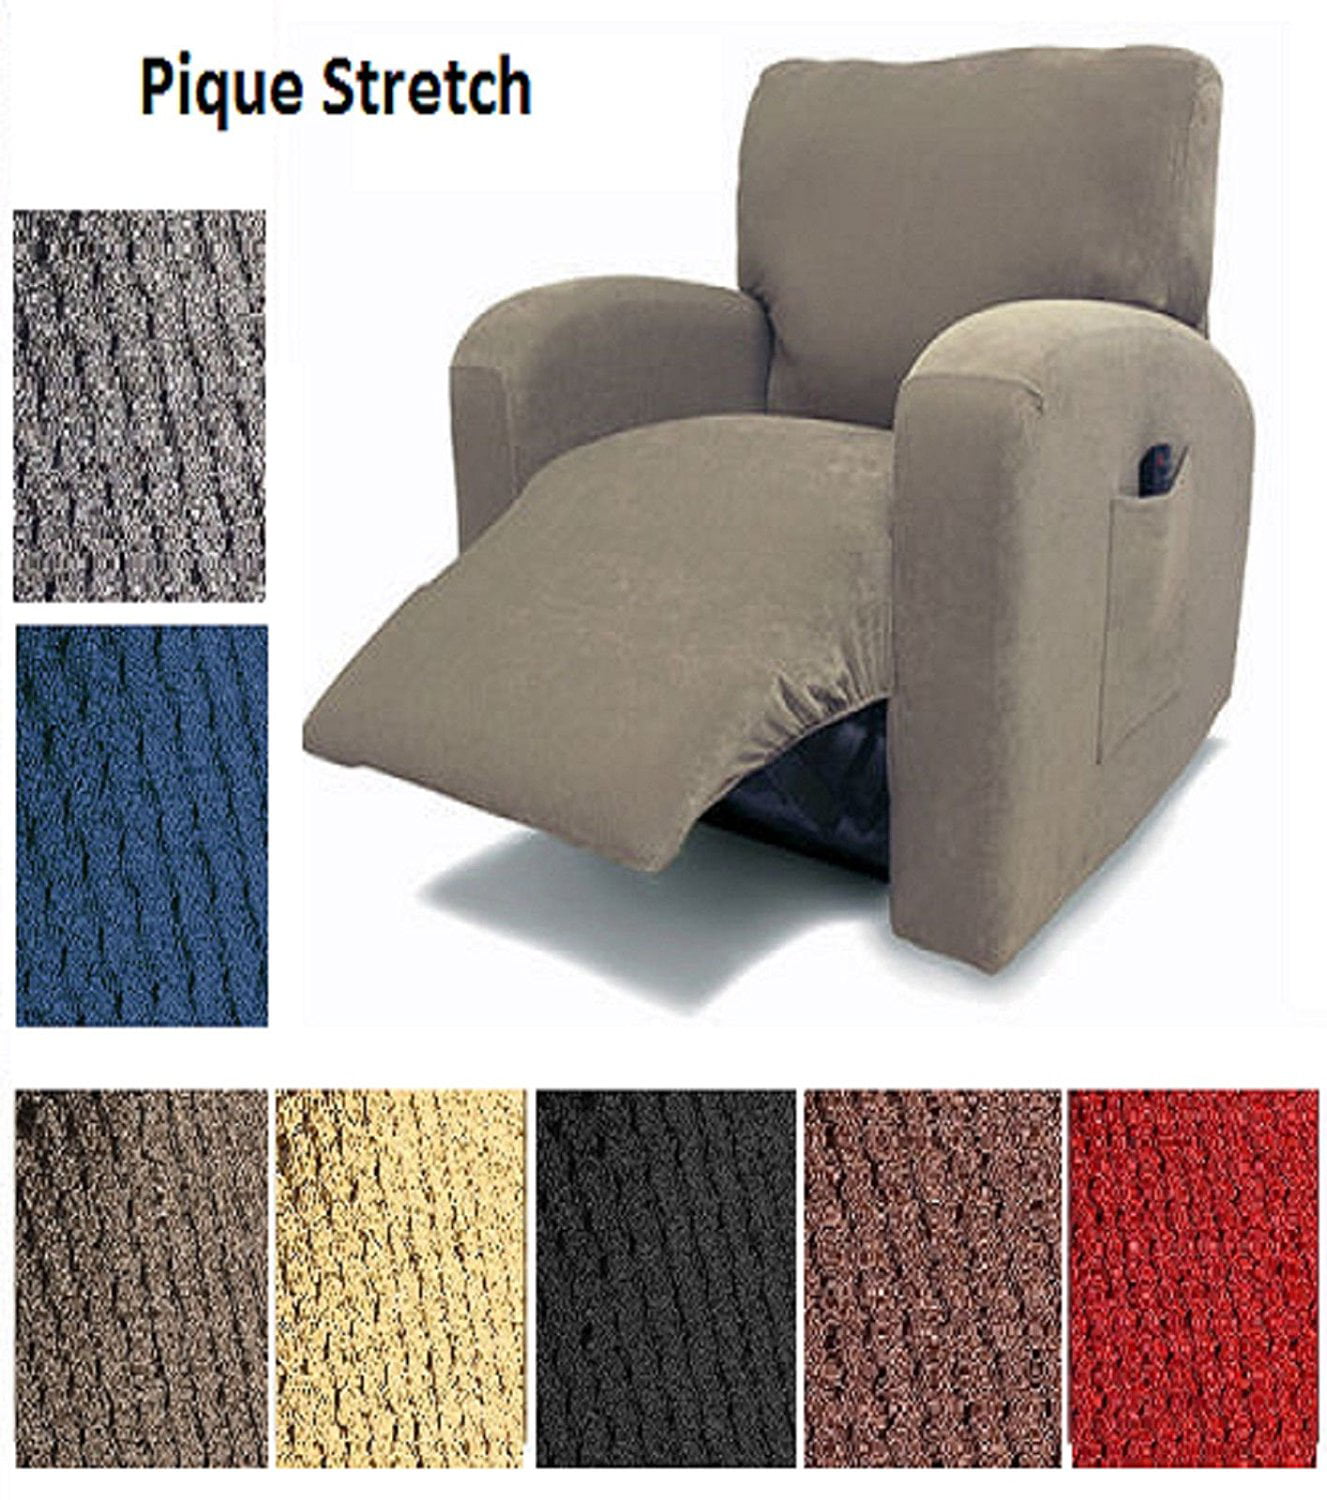 RECLINER COVER-STRETCH-PIQUE-LARGE SIZE-LAZY BOY--FOREST-4 PC-VISIT OUR STORE XX 